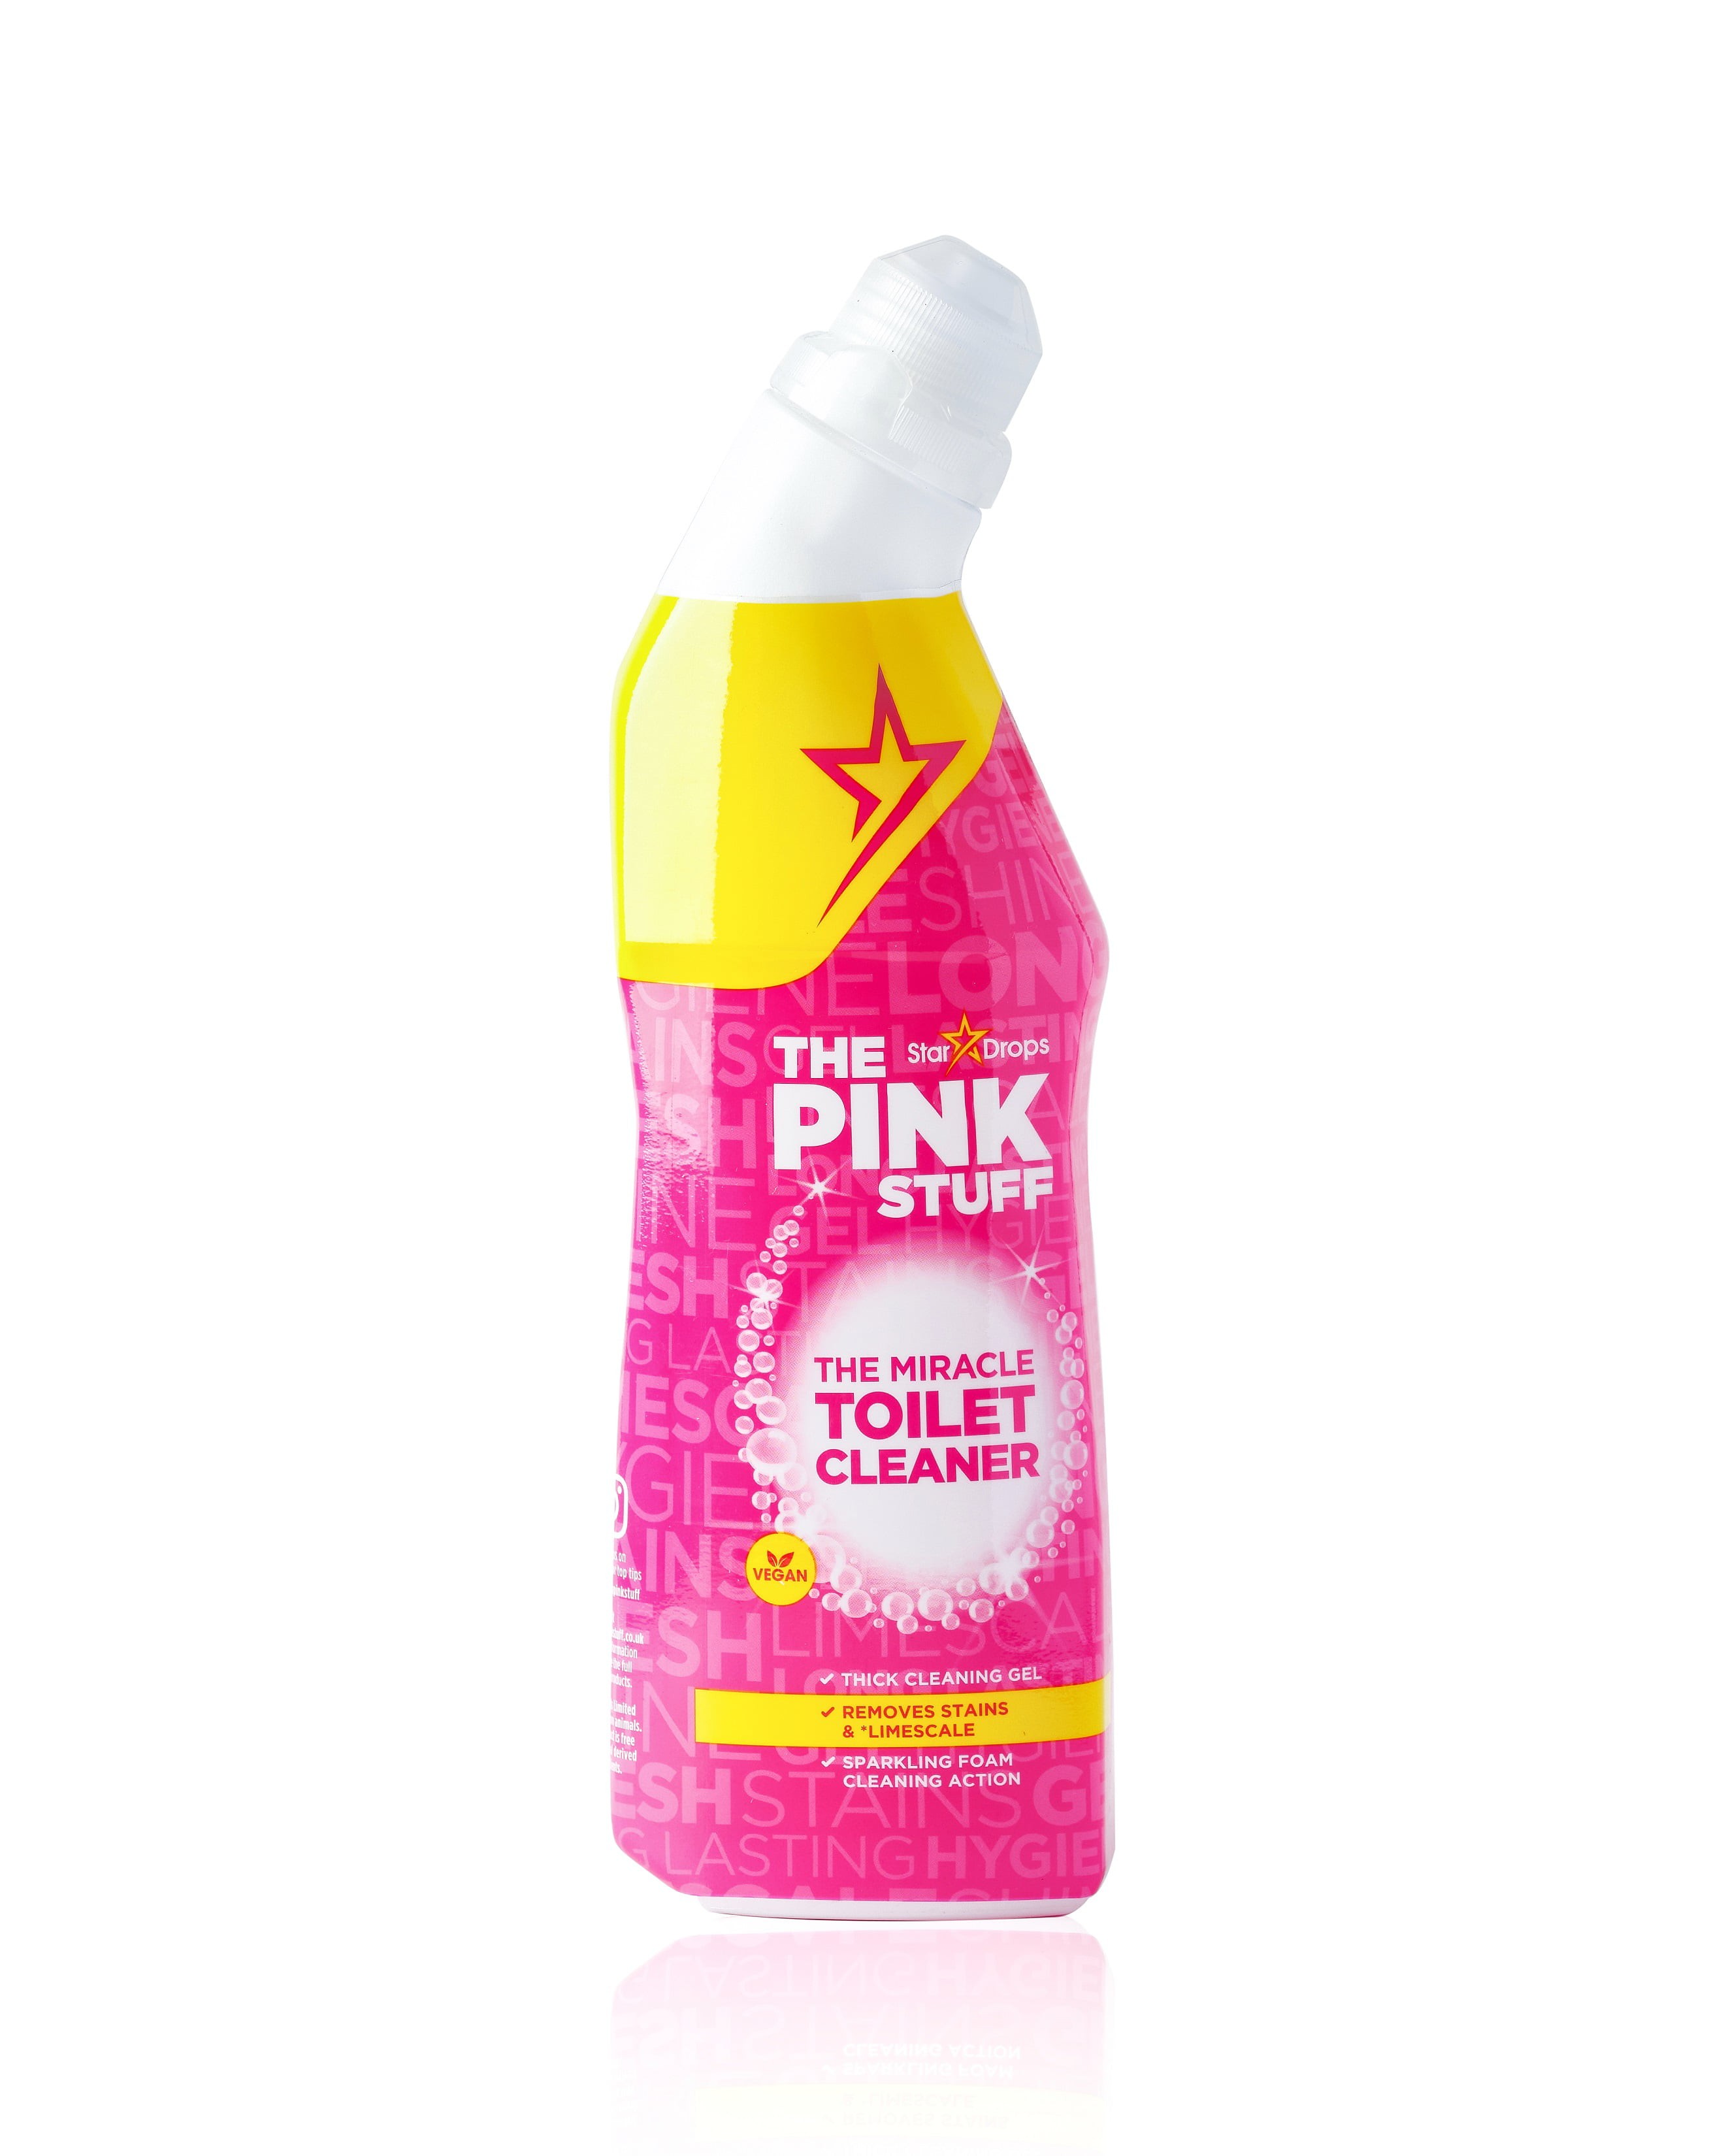 The Pink Stuff, Miracle Laundry Fabric Conditioner, Liquid, 32 Loads, 32.5  fl. oz.